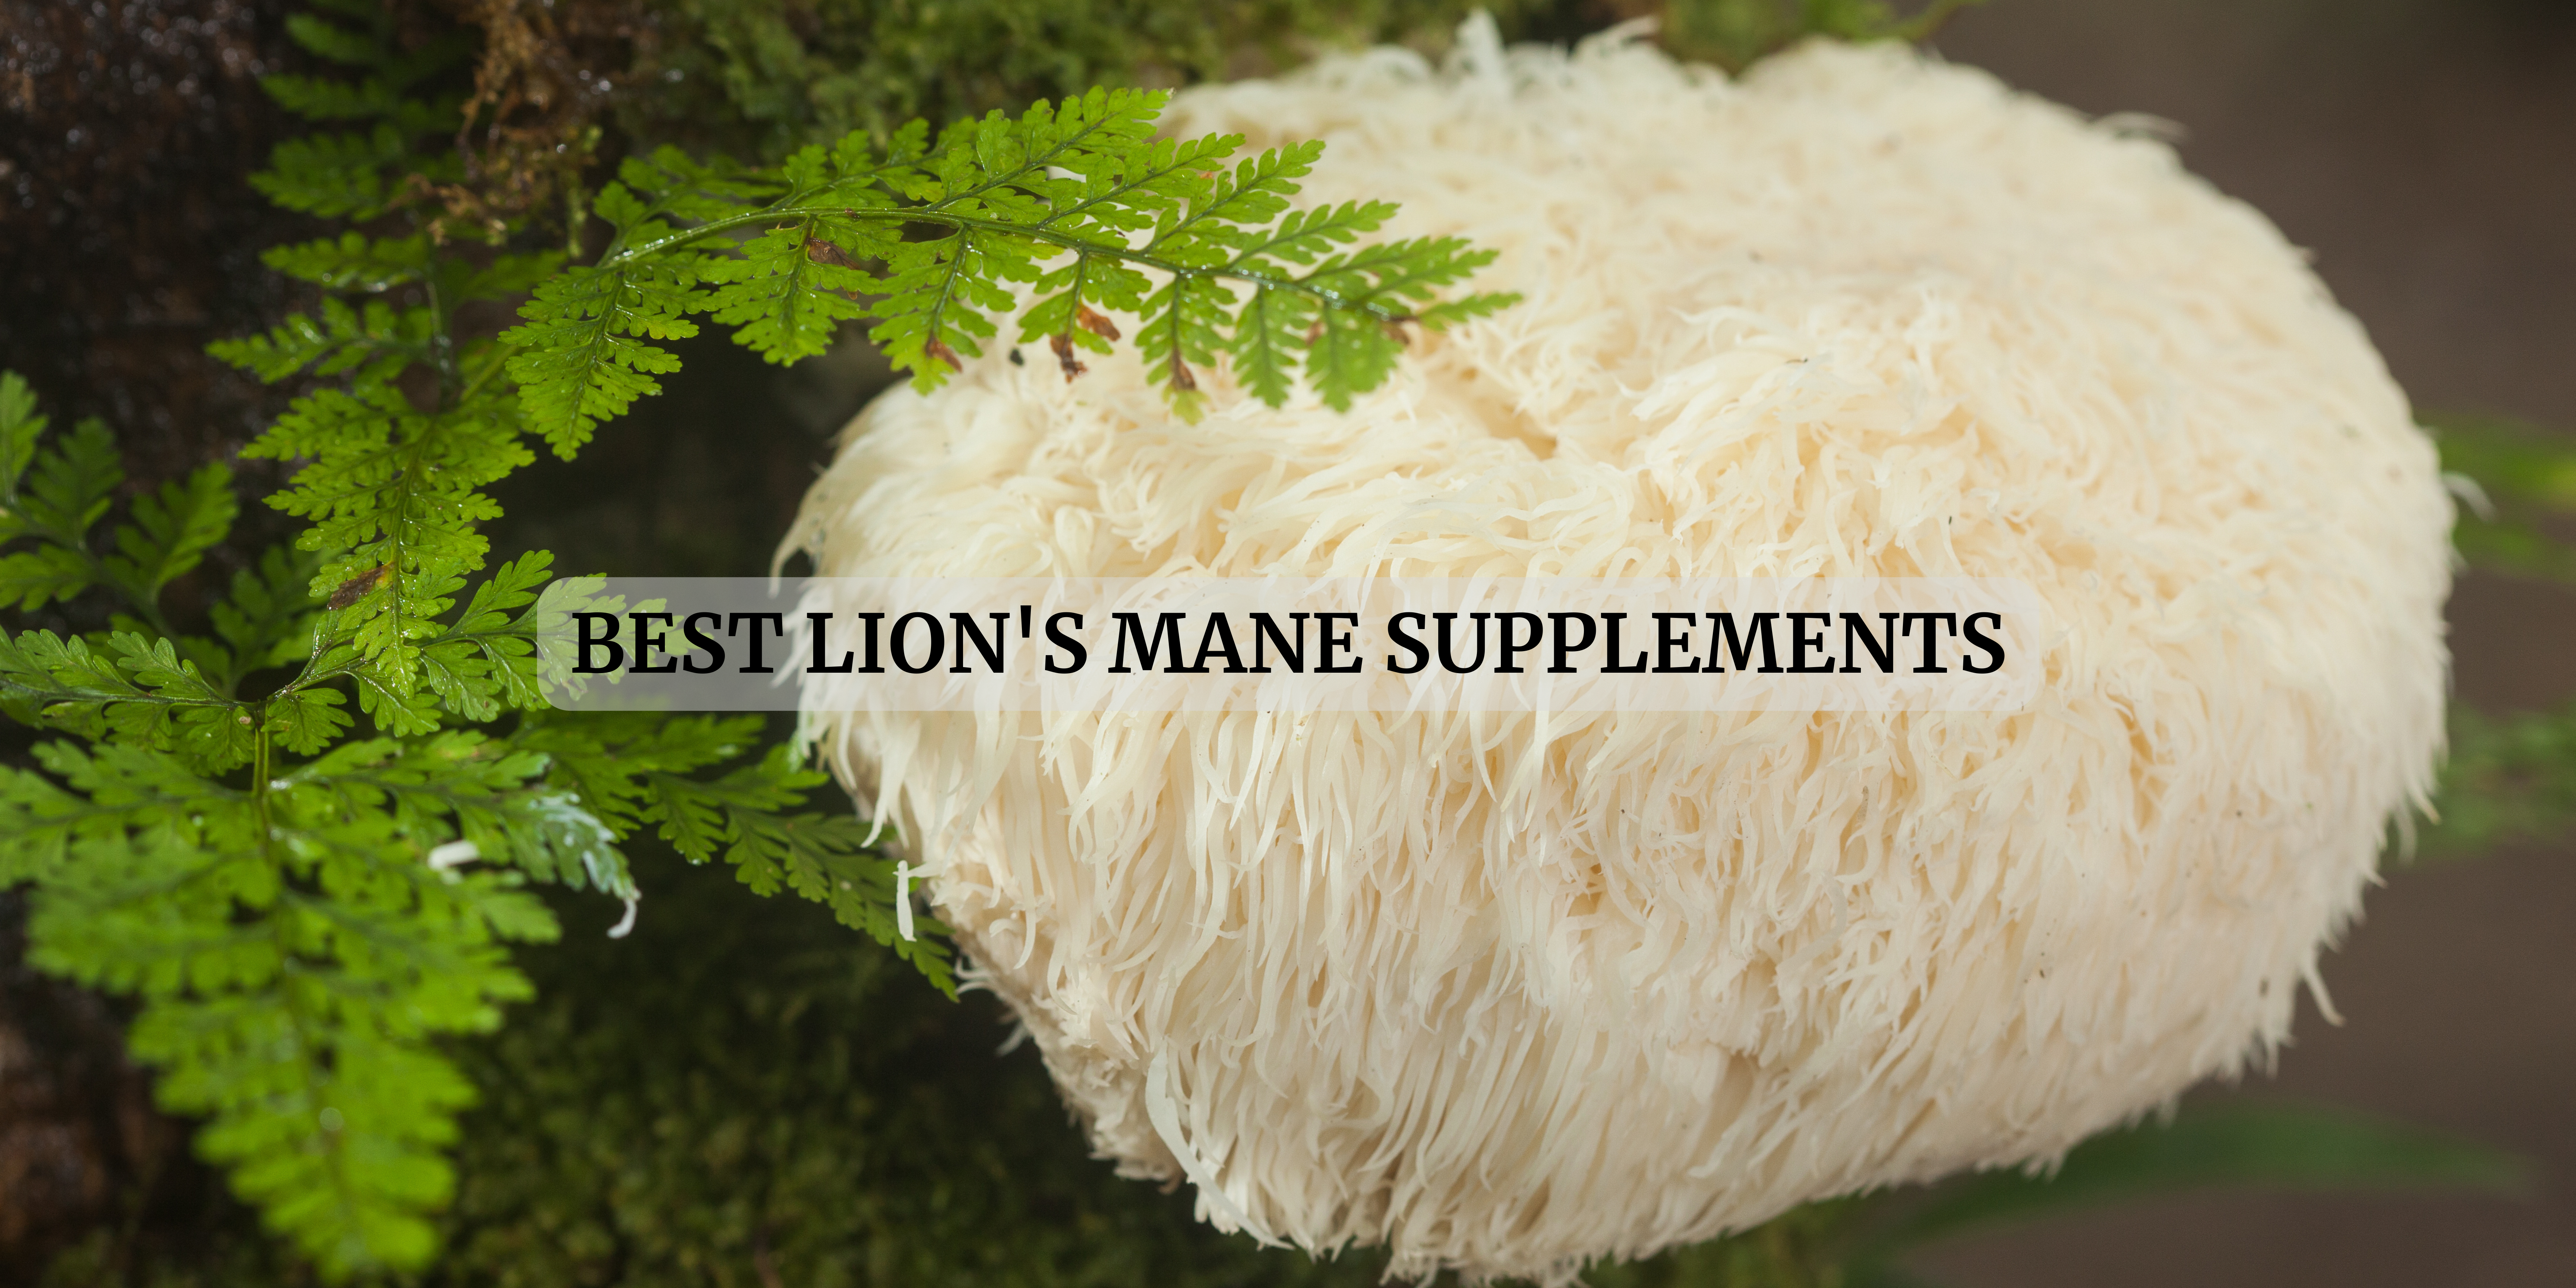 lion's mane supplements in Germany